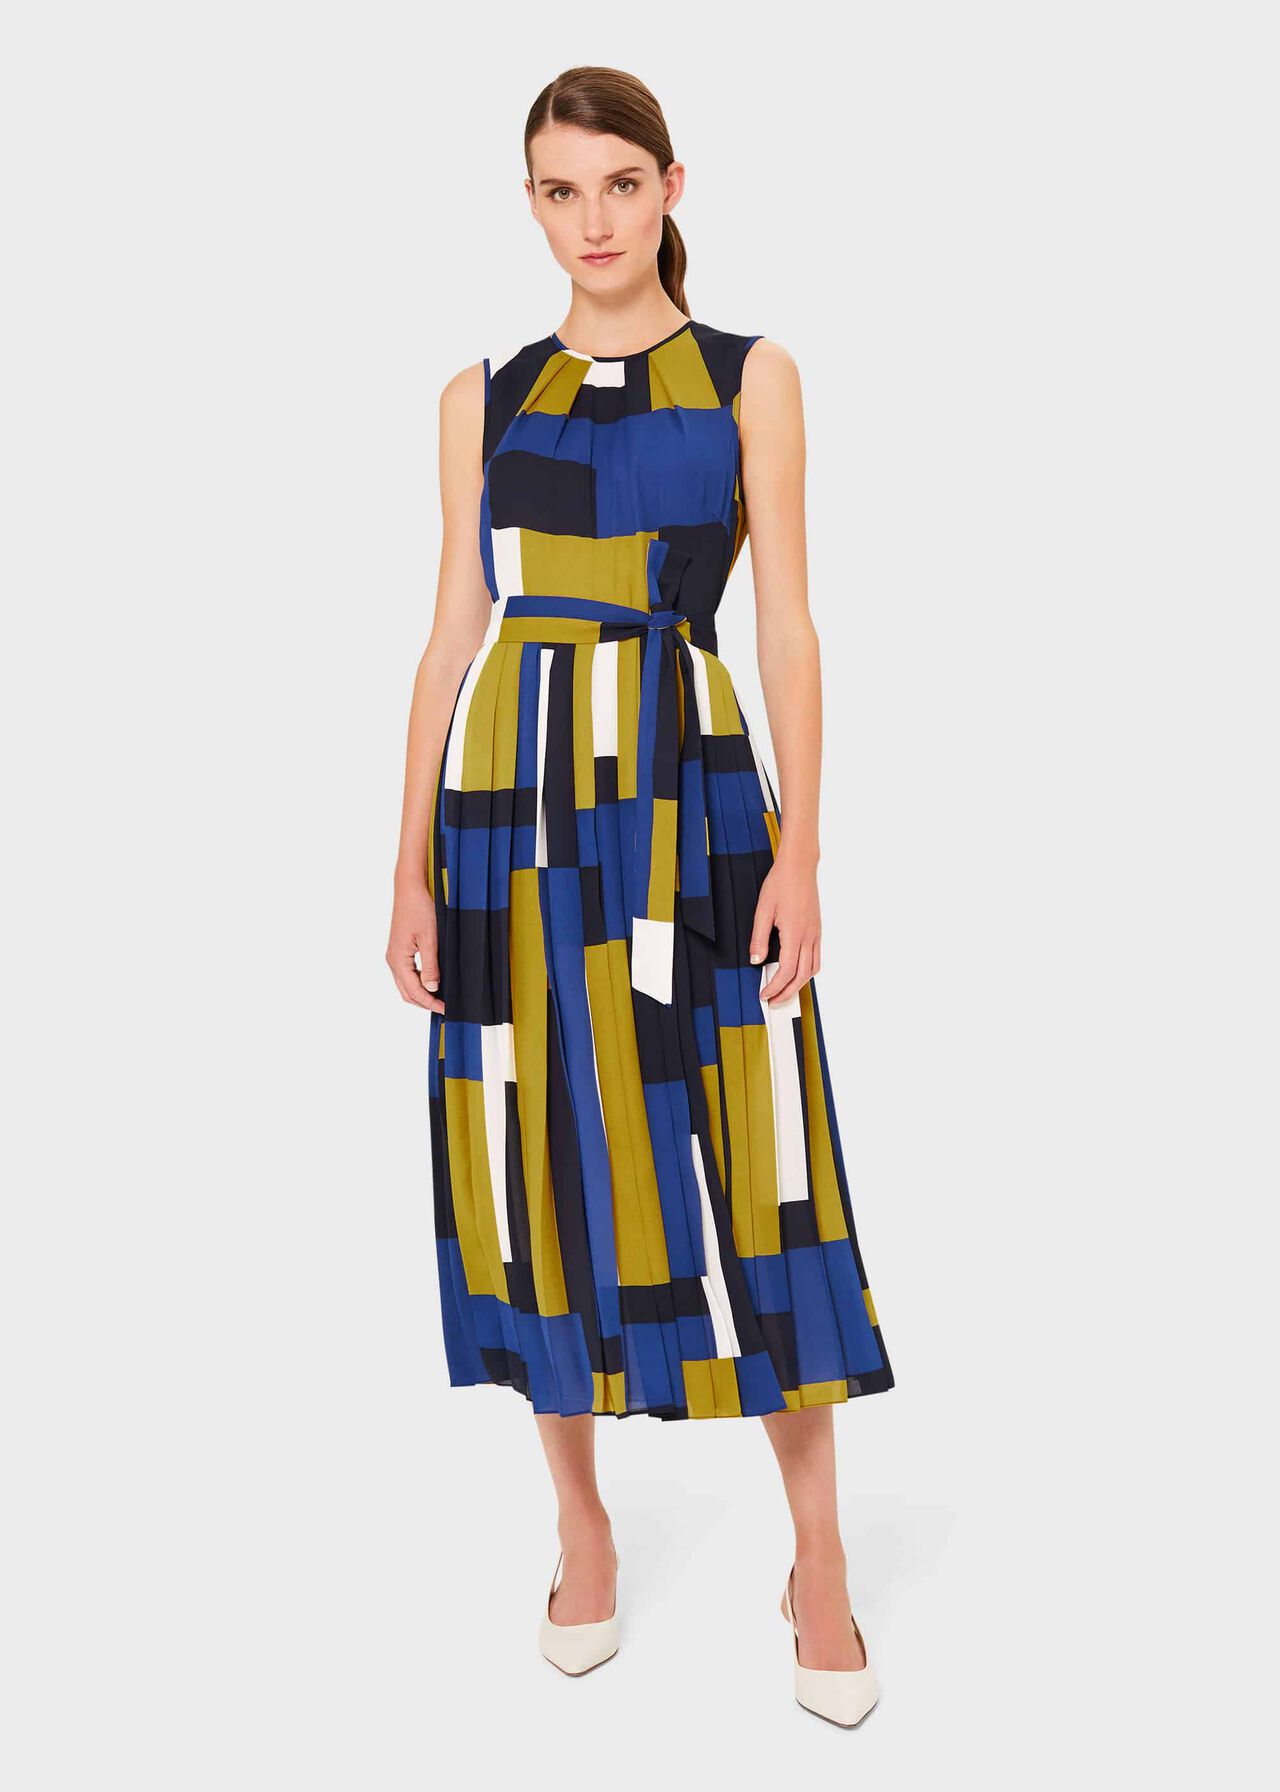 All Sale | Sale Clothes, Dresses, Coats, Tops & Shoes for Women | Hobbs  London | Hobbs